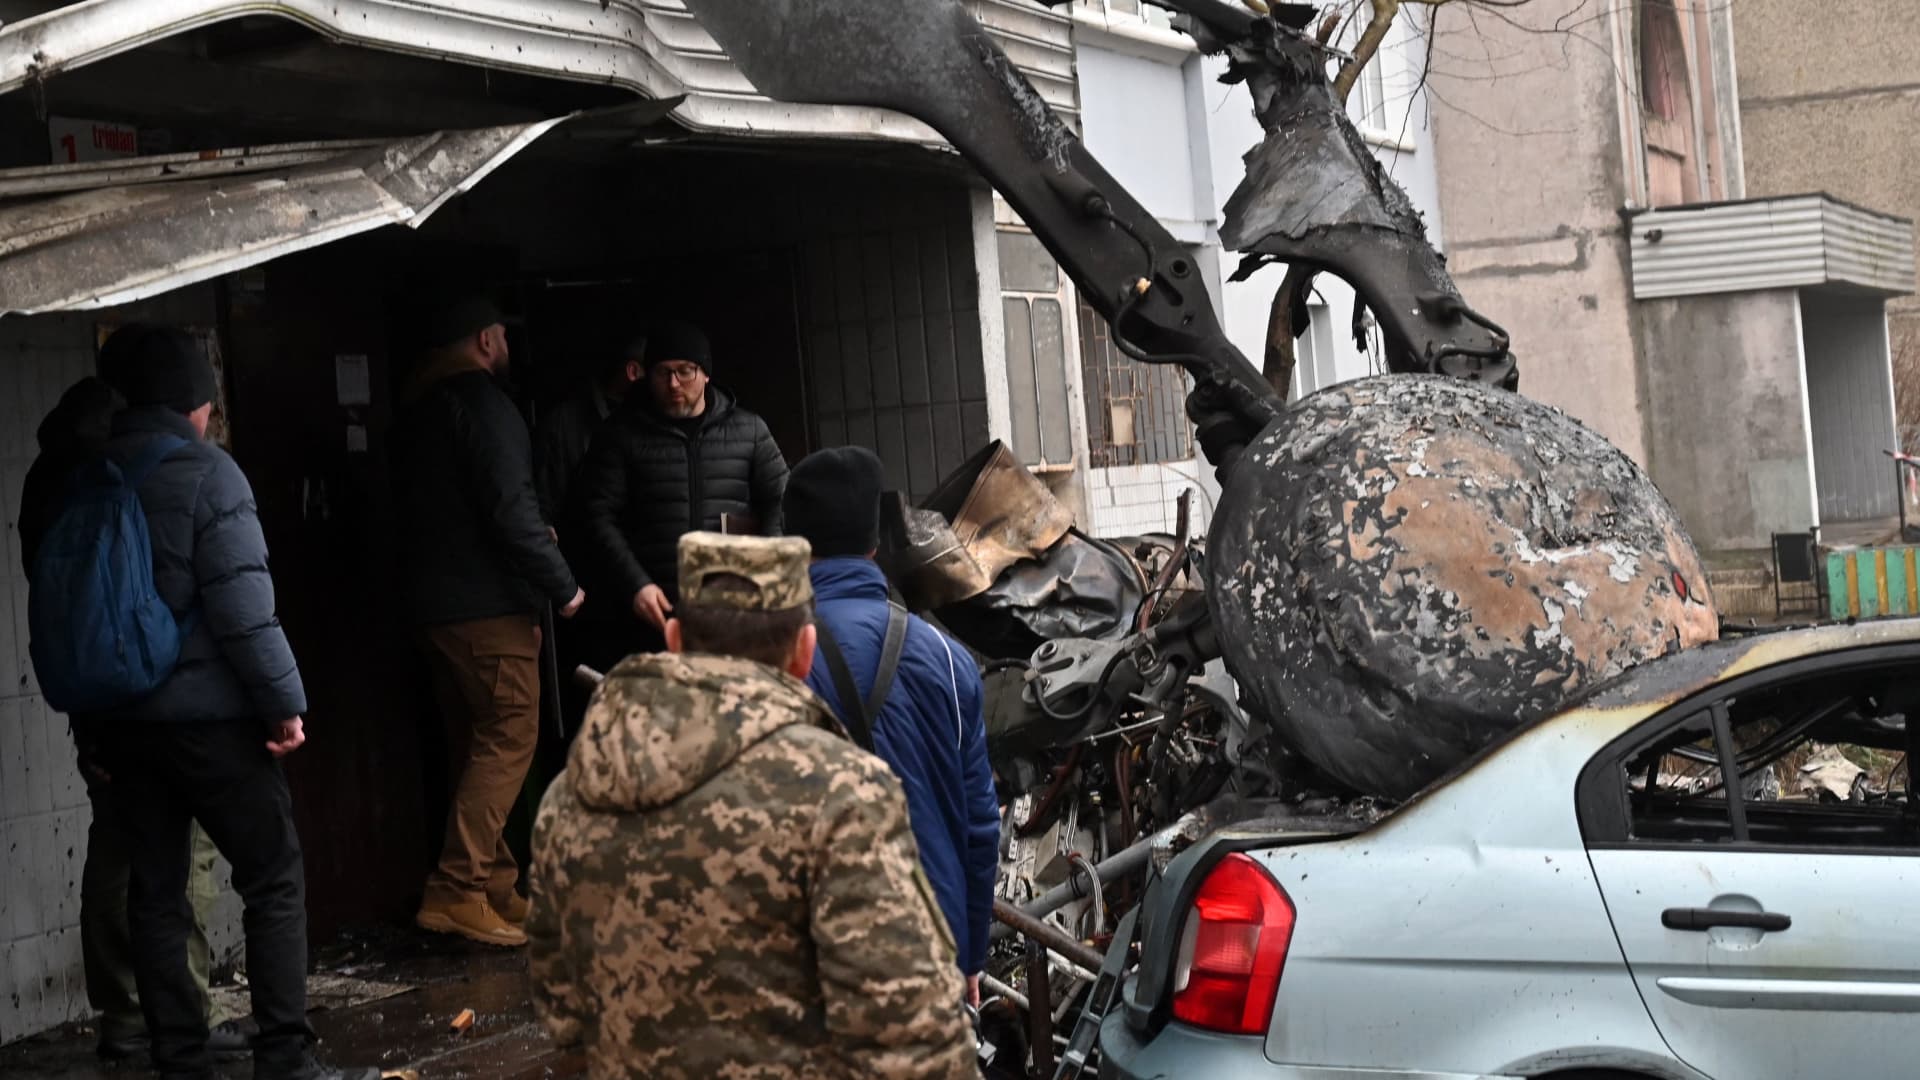 Military stand at the site where a helicopter crashed near a kindergarten in Brovary, outside the capital Kyiv, killing Sixteen people, including two children and Ukrainian interior minister, on January 18, 2023, amid the Russian invasion of Ukraine.